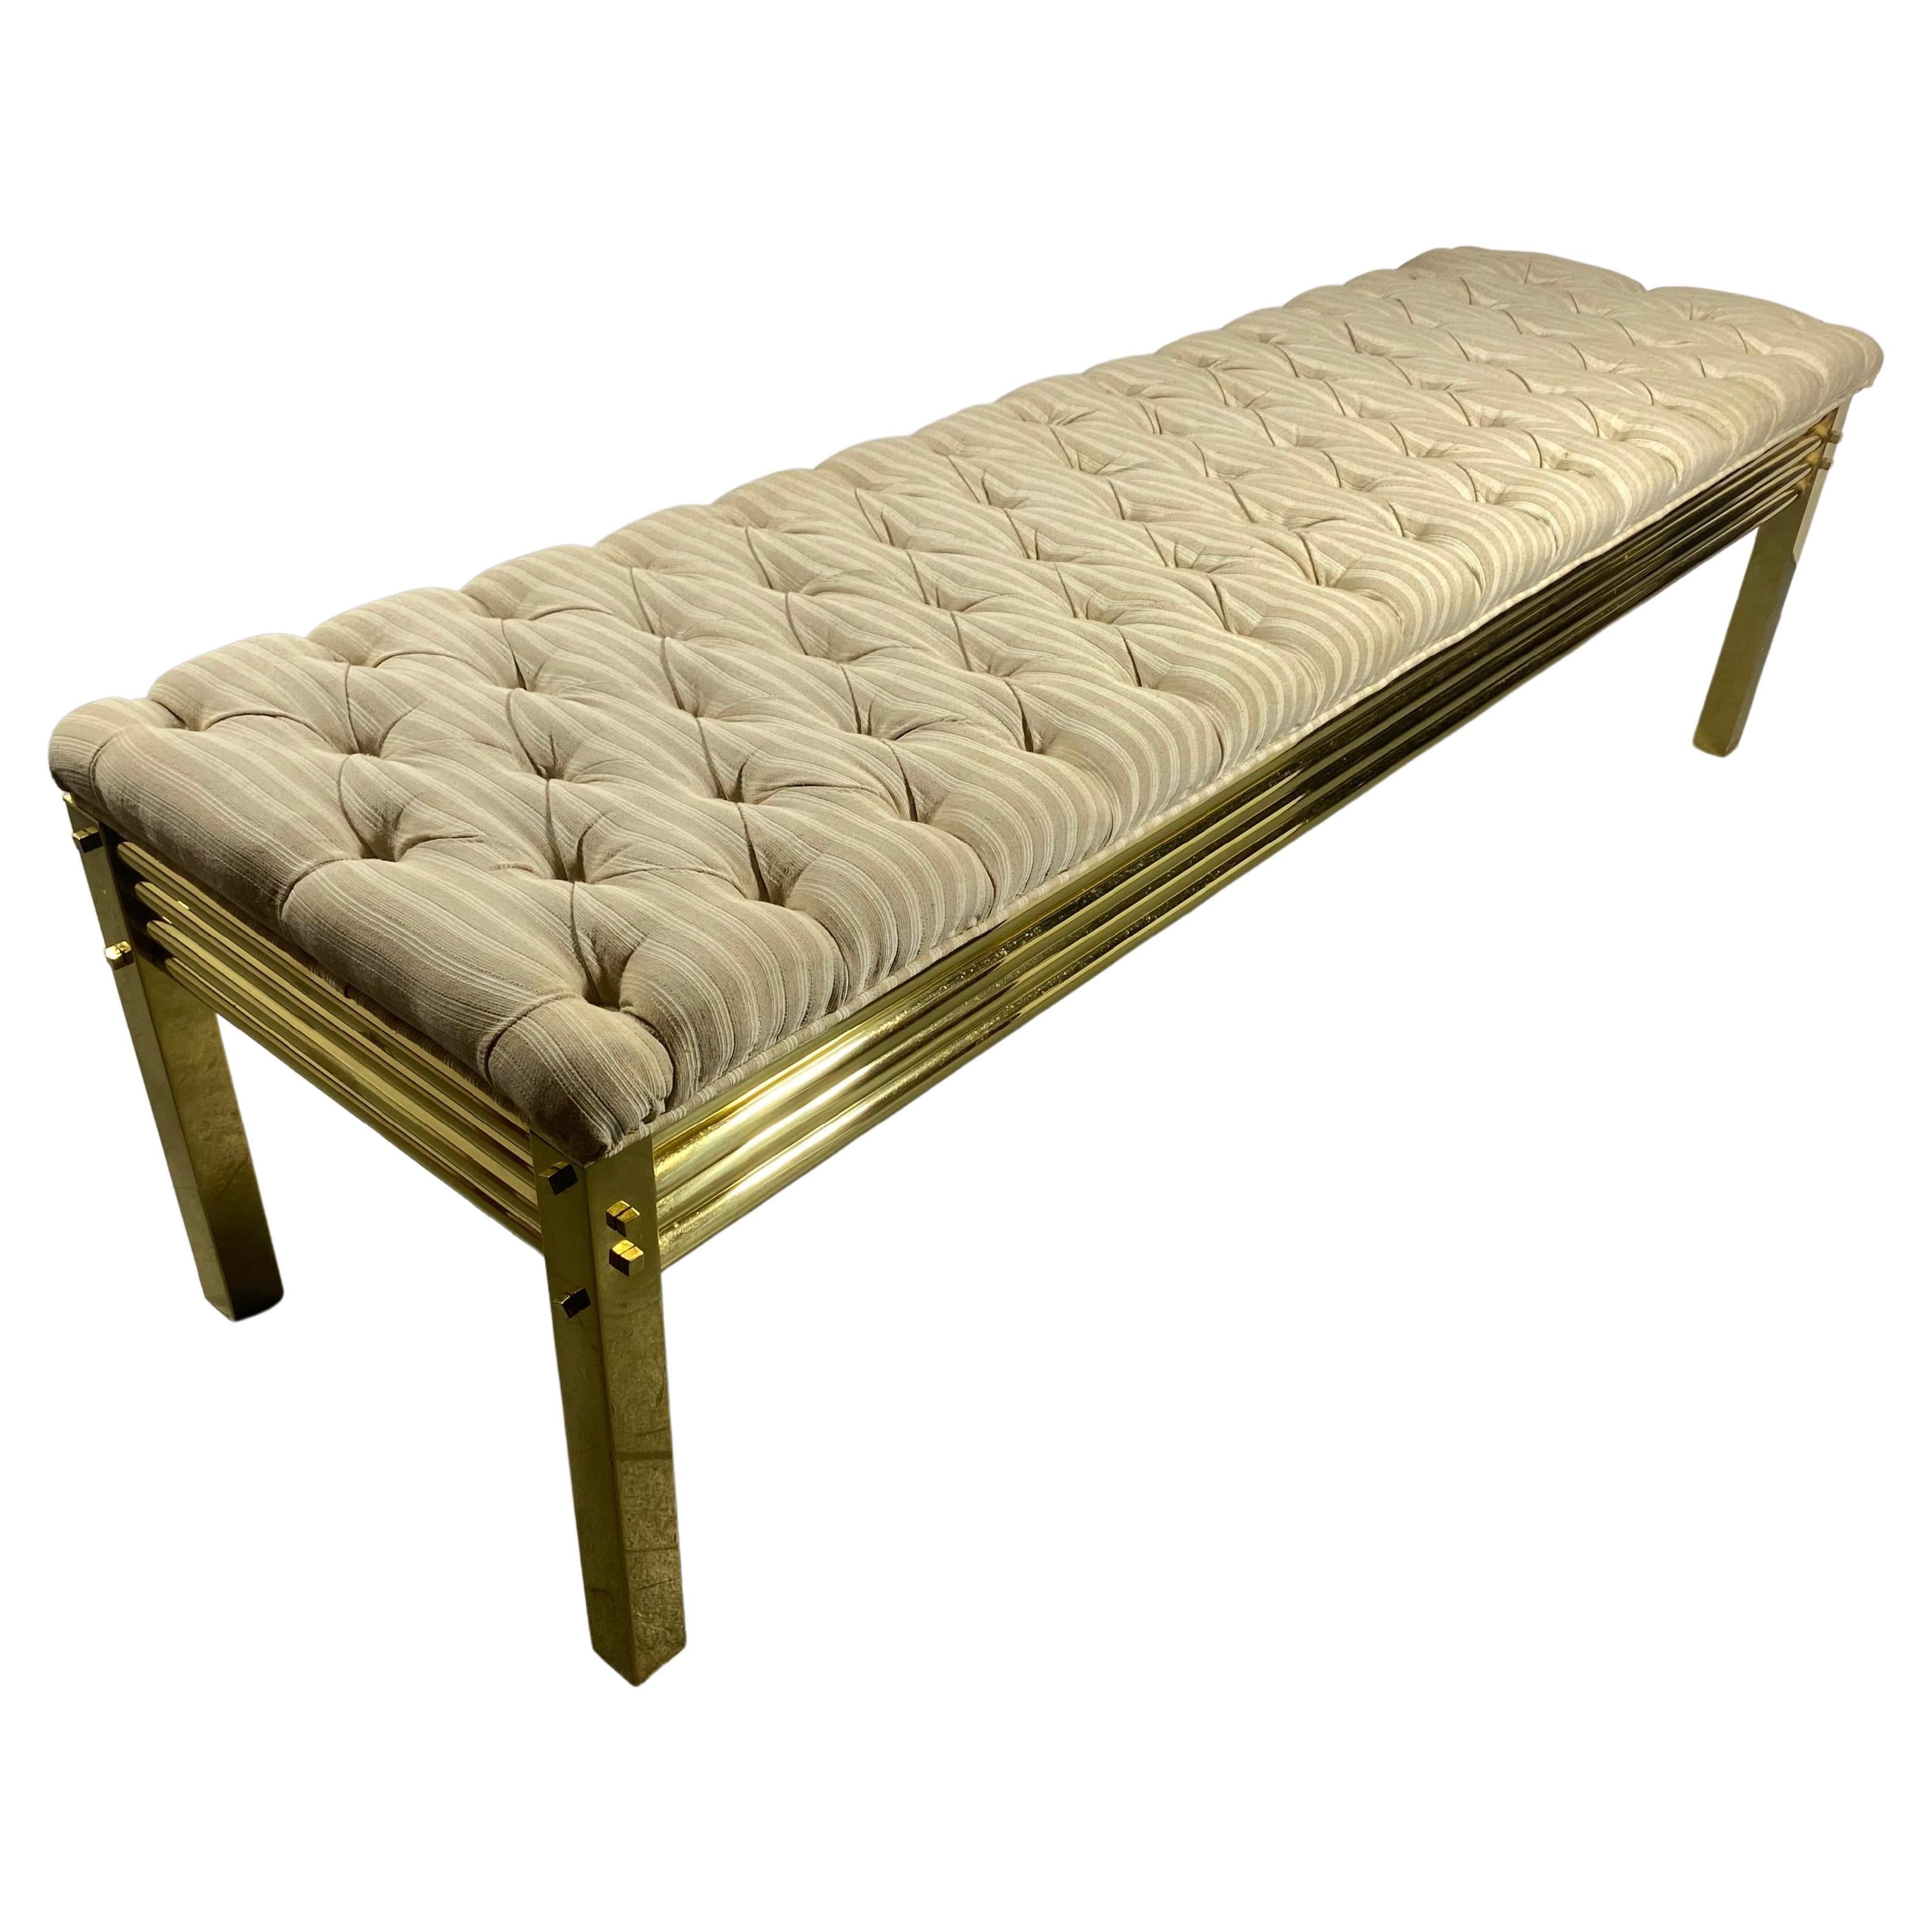 Stunning Brass and Tufted Top Bench, Manner of Karl Springer For Sale